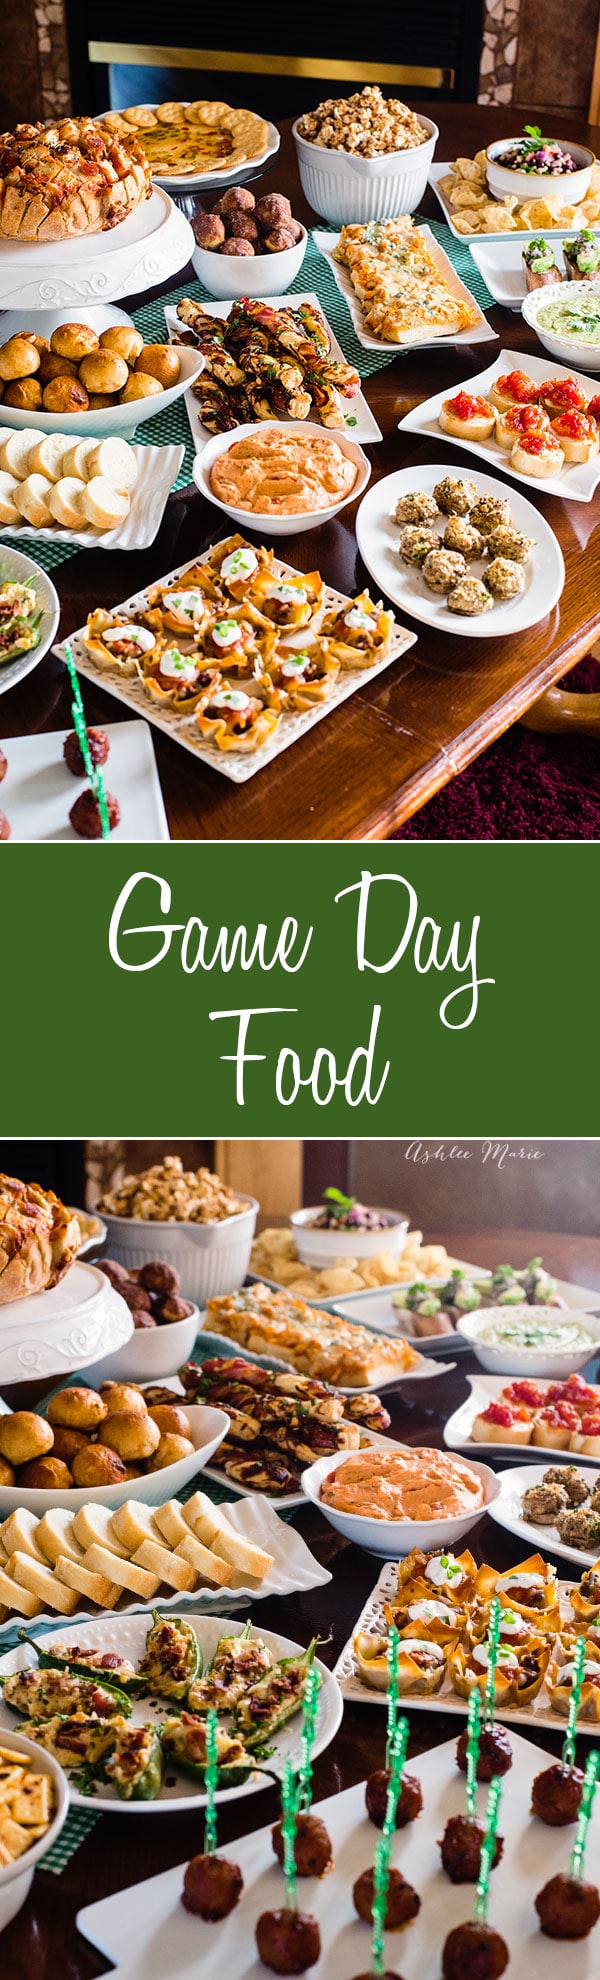 game day food from some of the top food bloggers